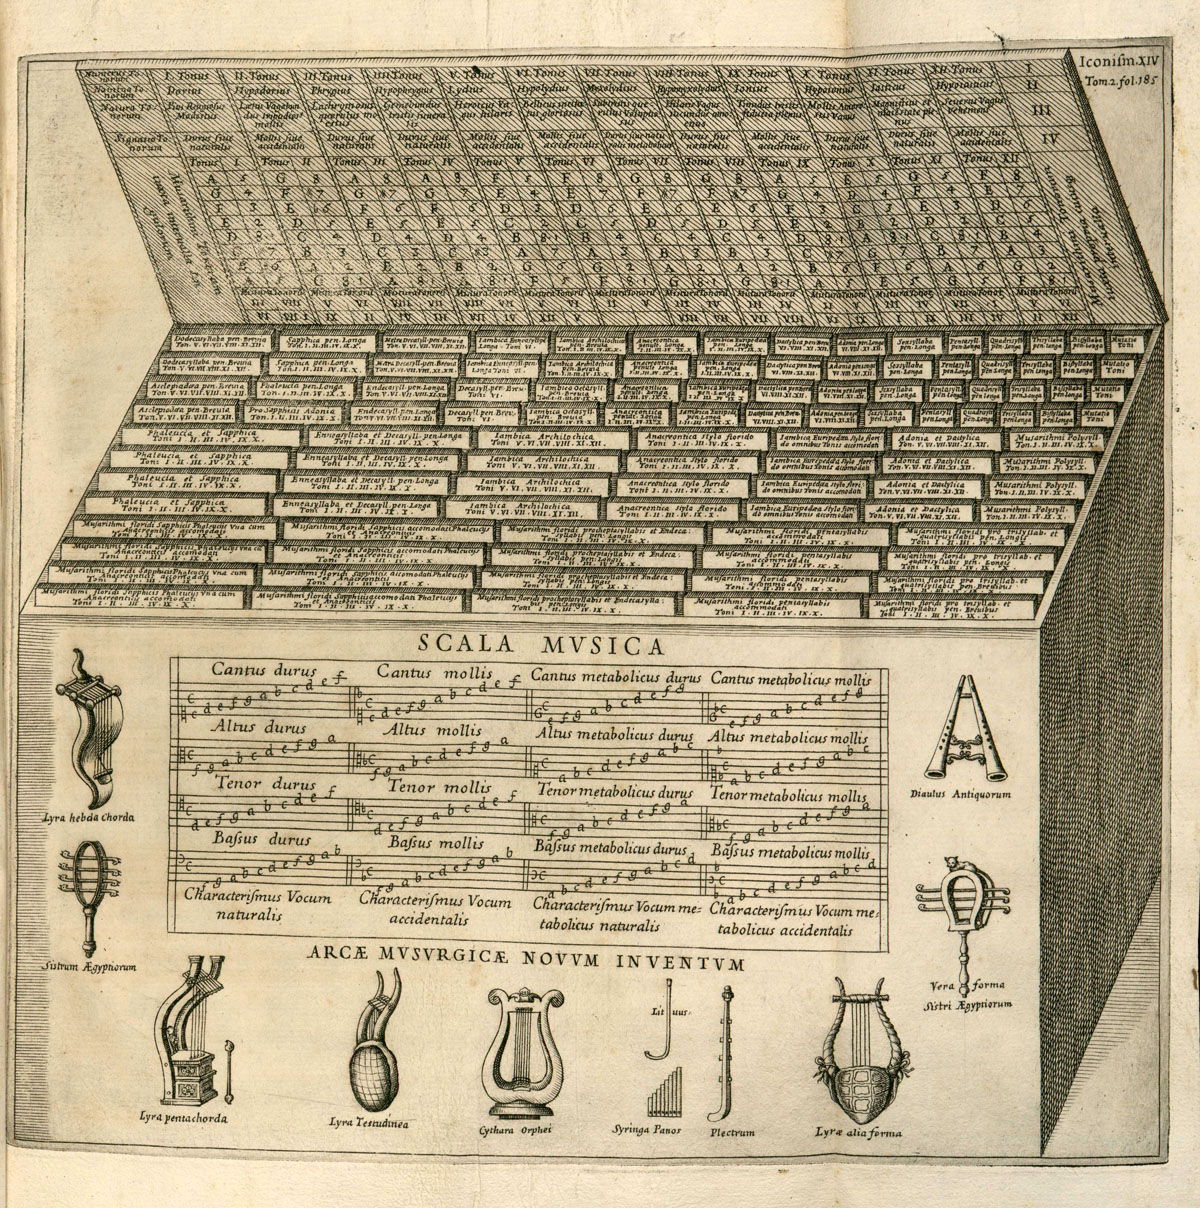 Engraving of the Arca musarithmica, from Athanasius Kircher, 'Musurgia universalis' (1650)